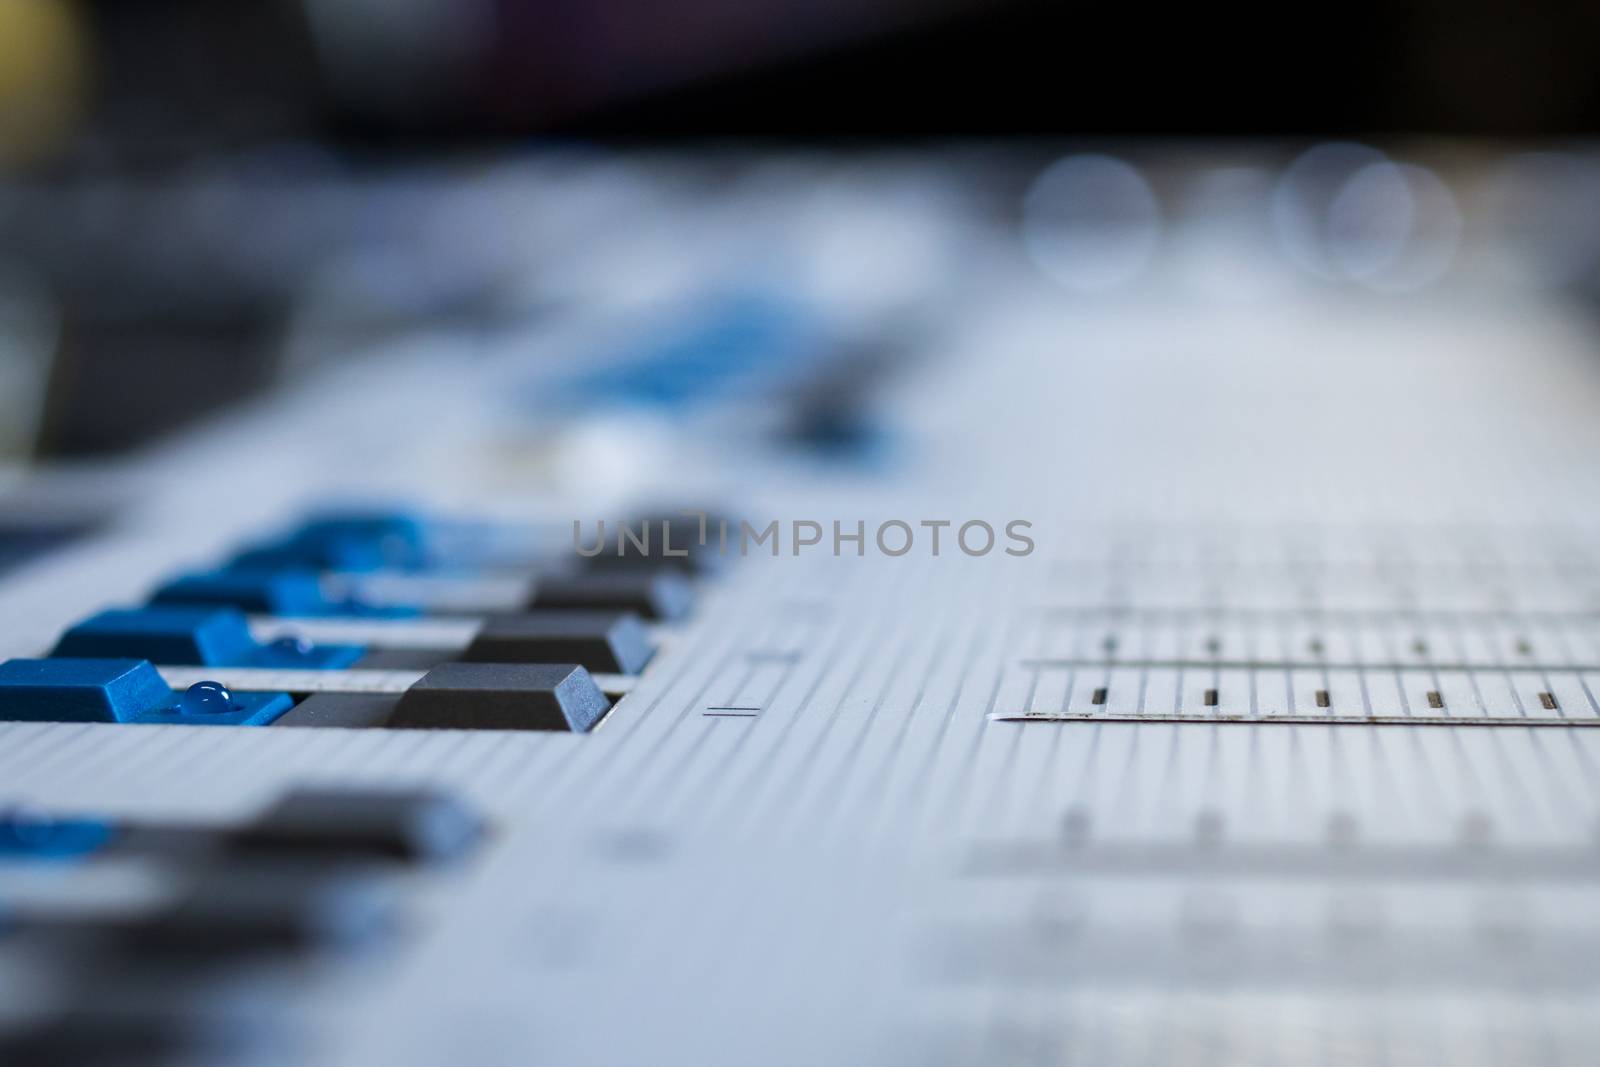 Low level view of a professional audio mixing console with soft focus background